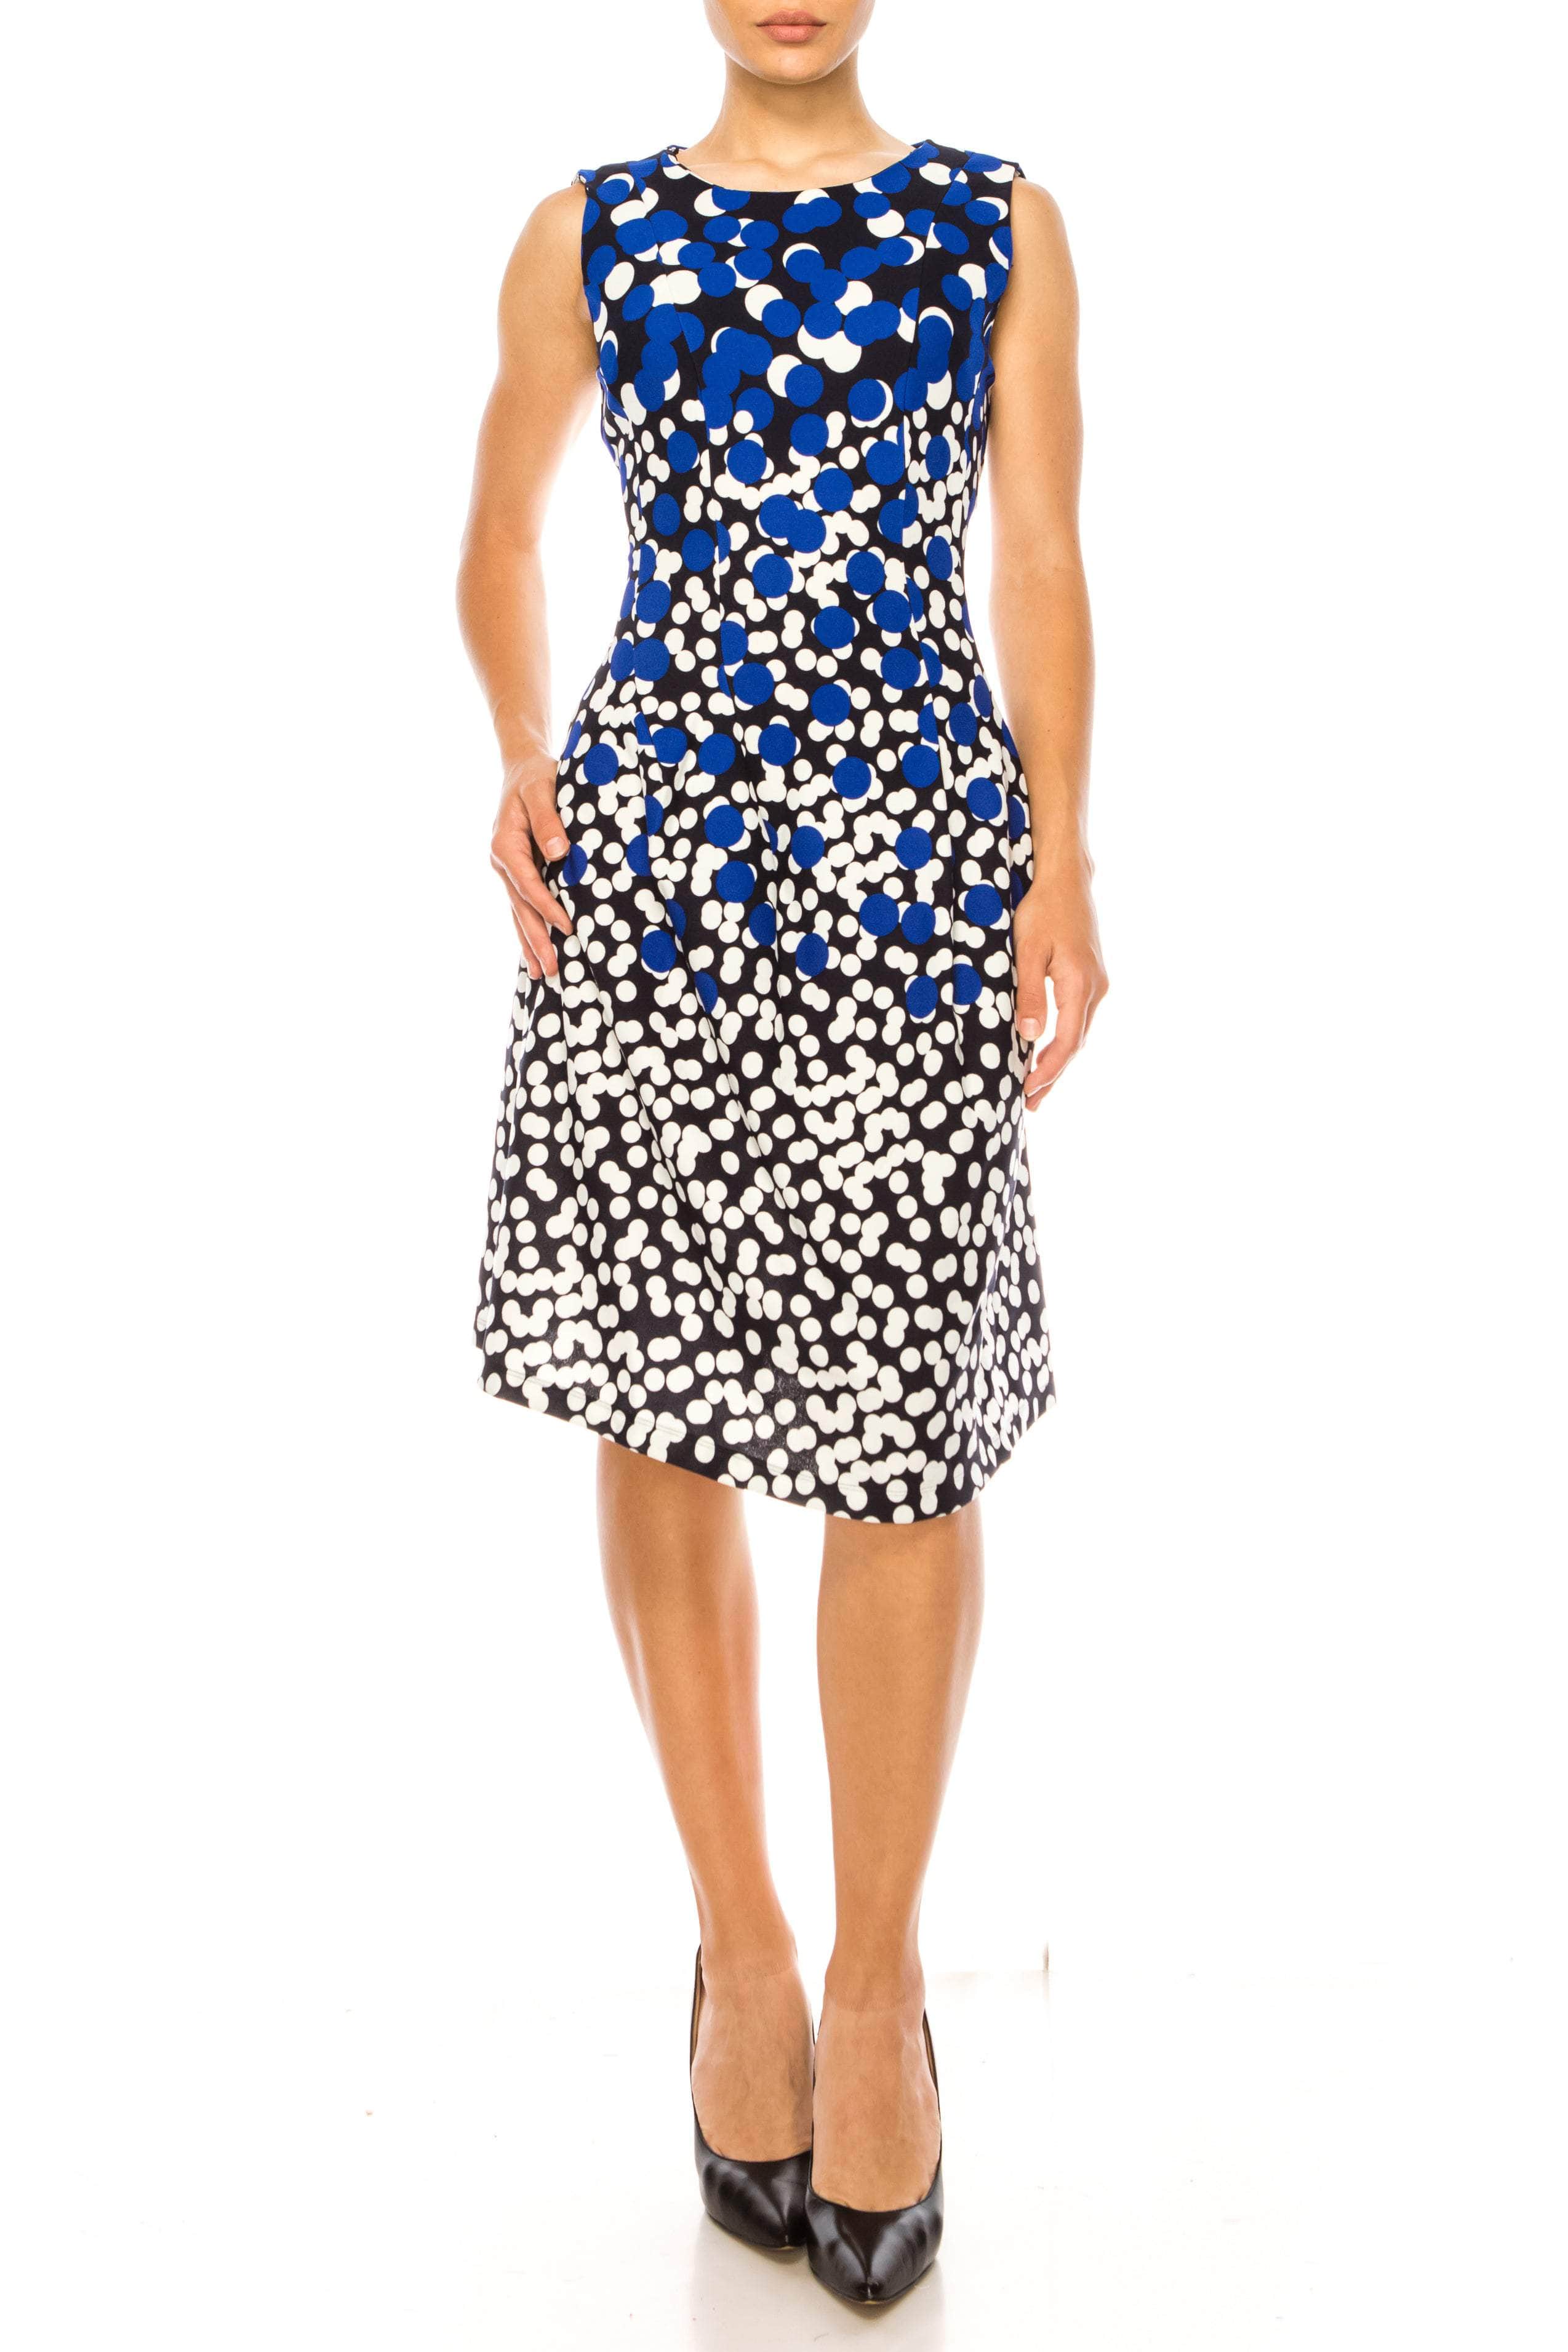 Image of New Yorker's Apparel SCP896C - Dotted Print A-Line Dress